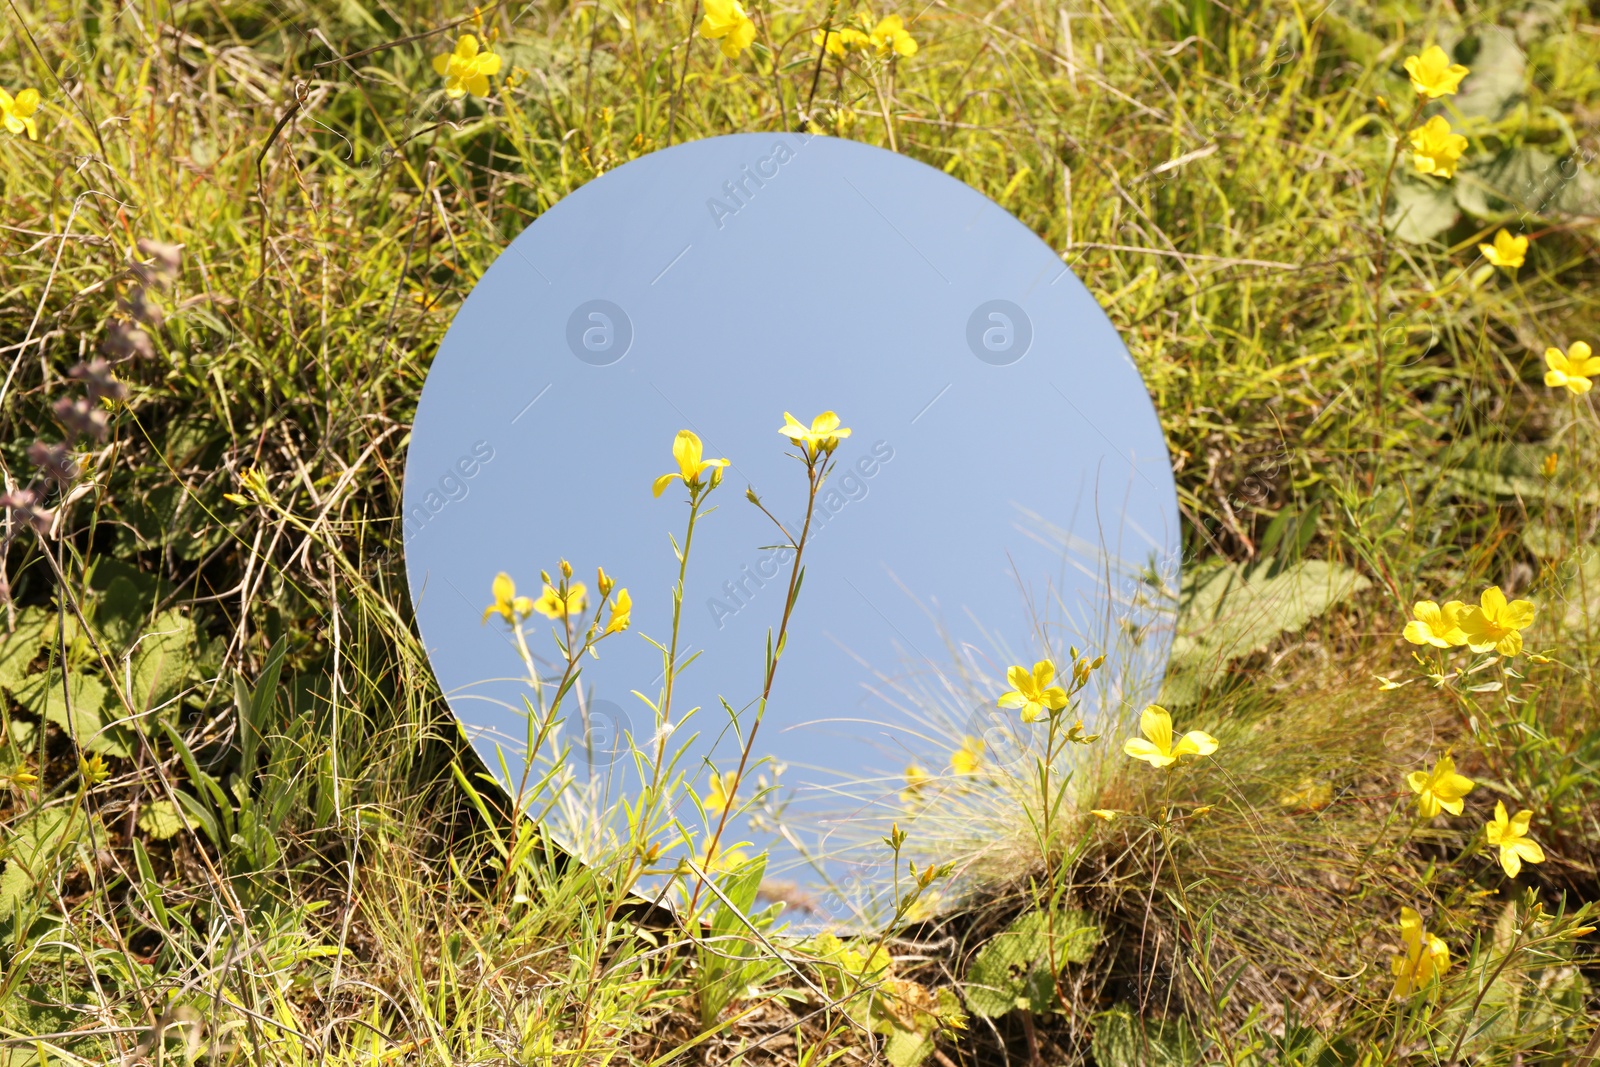 Photo of Spring atmosphere. Round mirror among grass and flowers on sunny day